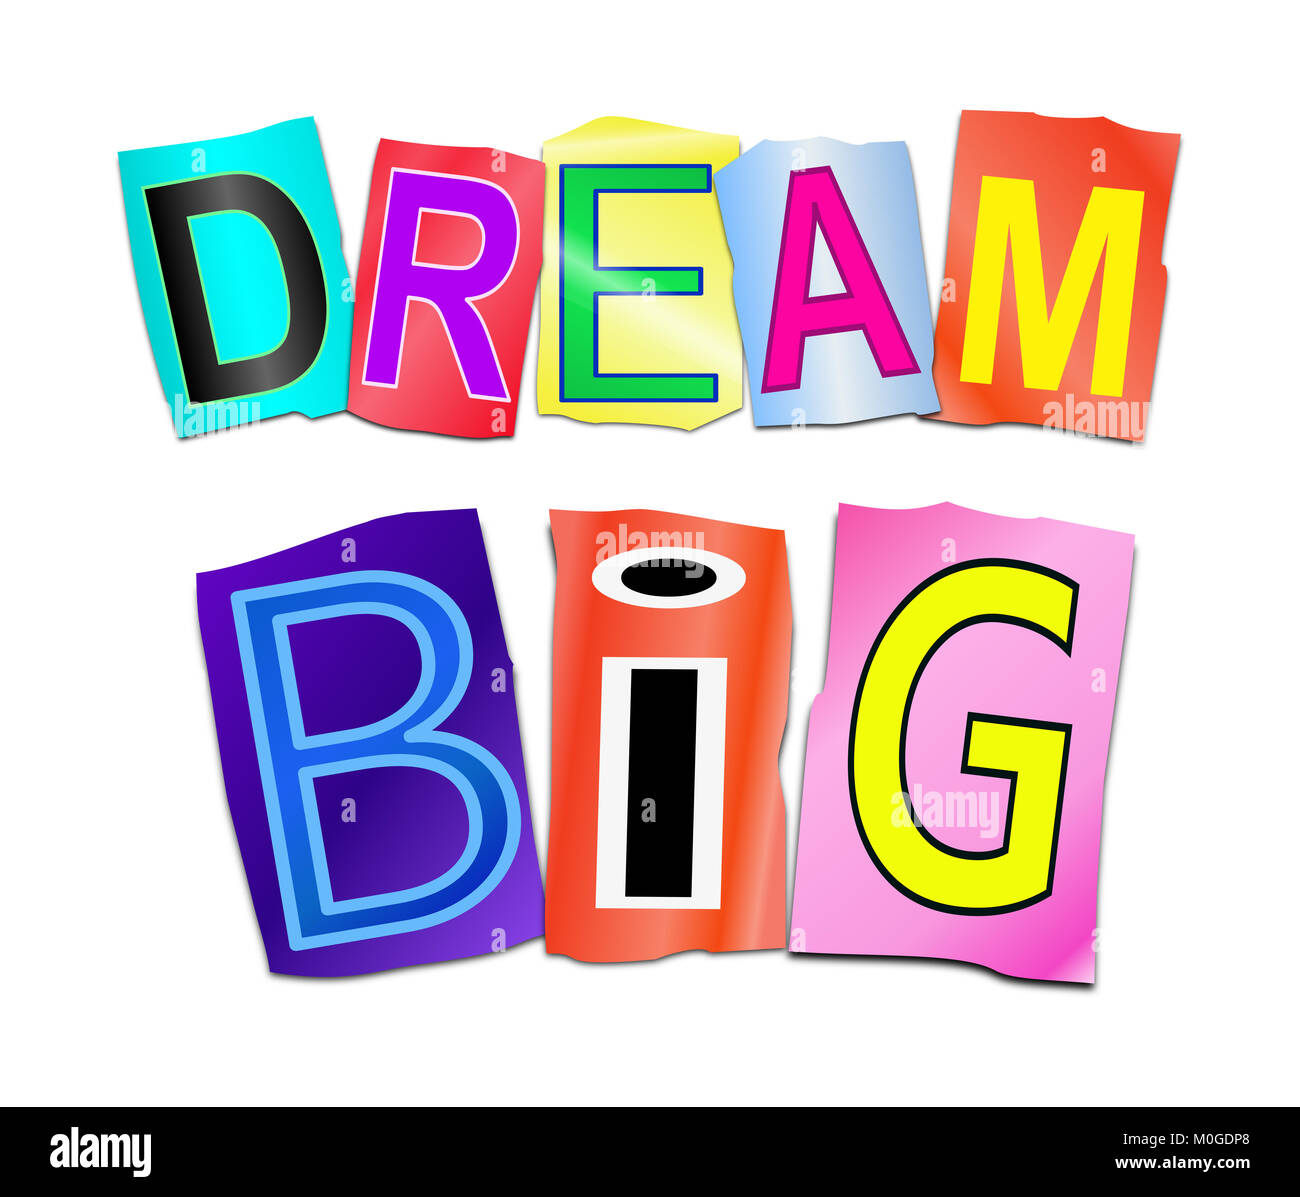 3d Illustration depicting a set of cut out printed letters arranged to form the words dream big. Stock Photo